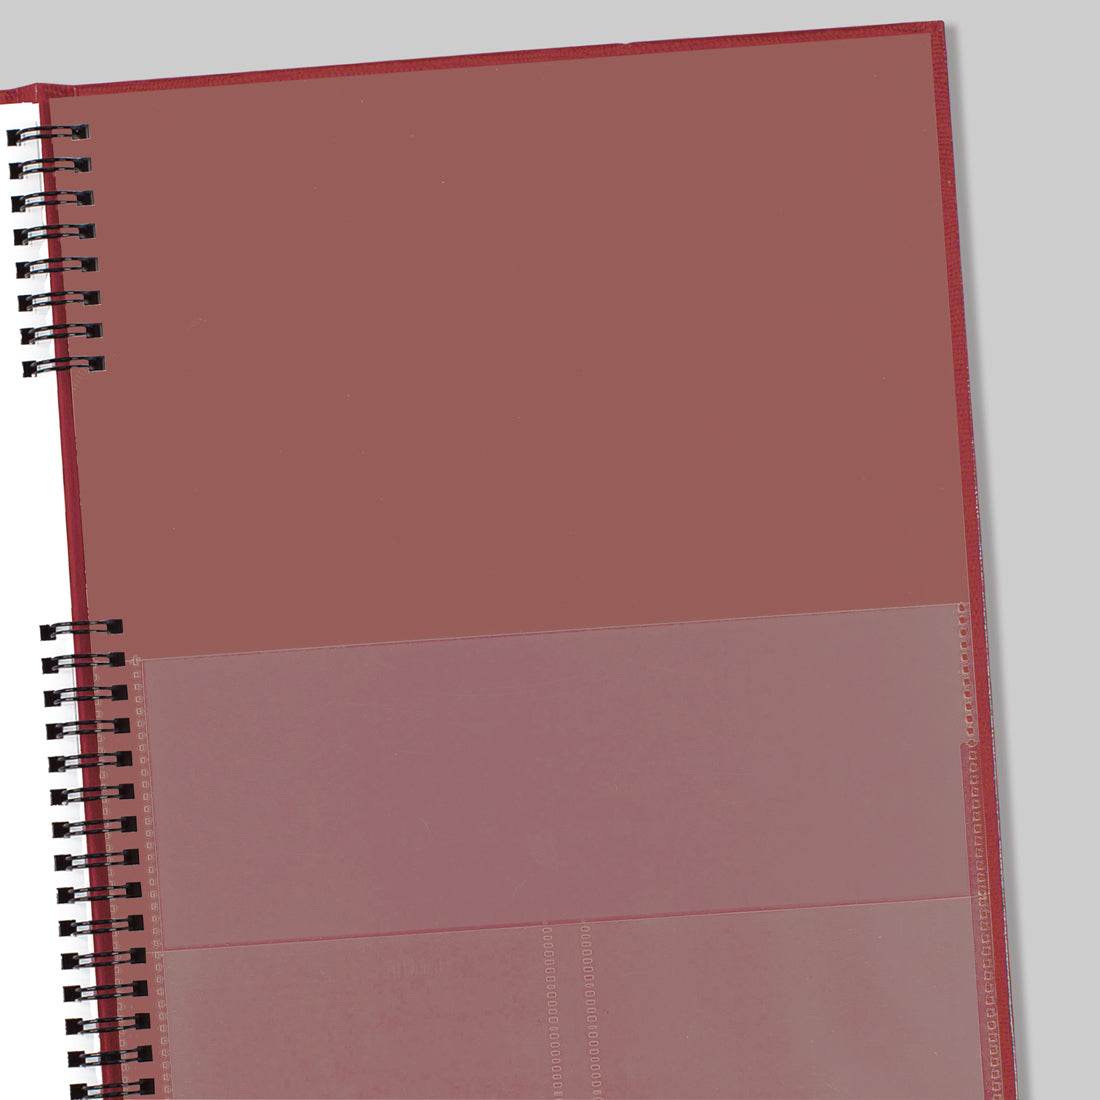 CoilPro Weekly Appointment Book 2024#colour_red